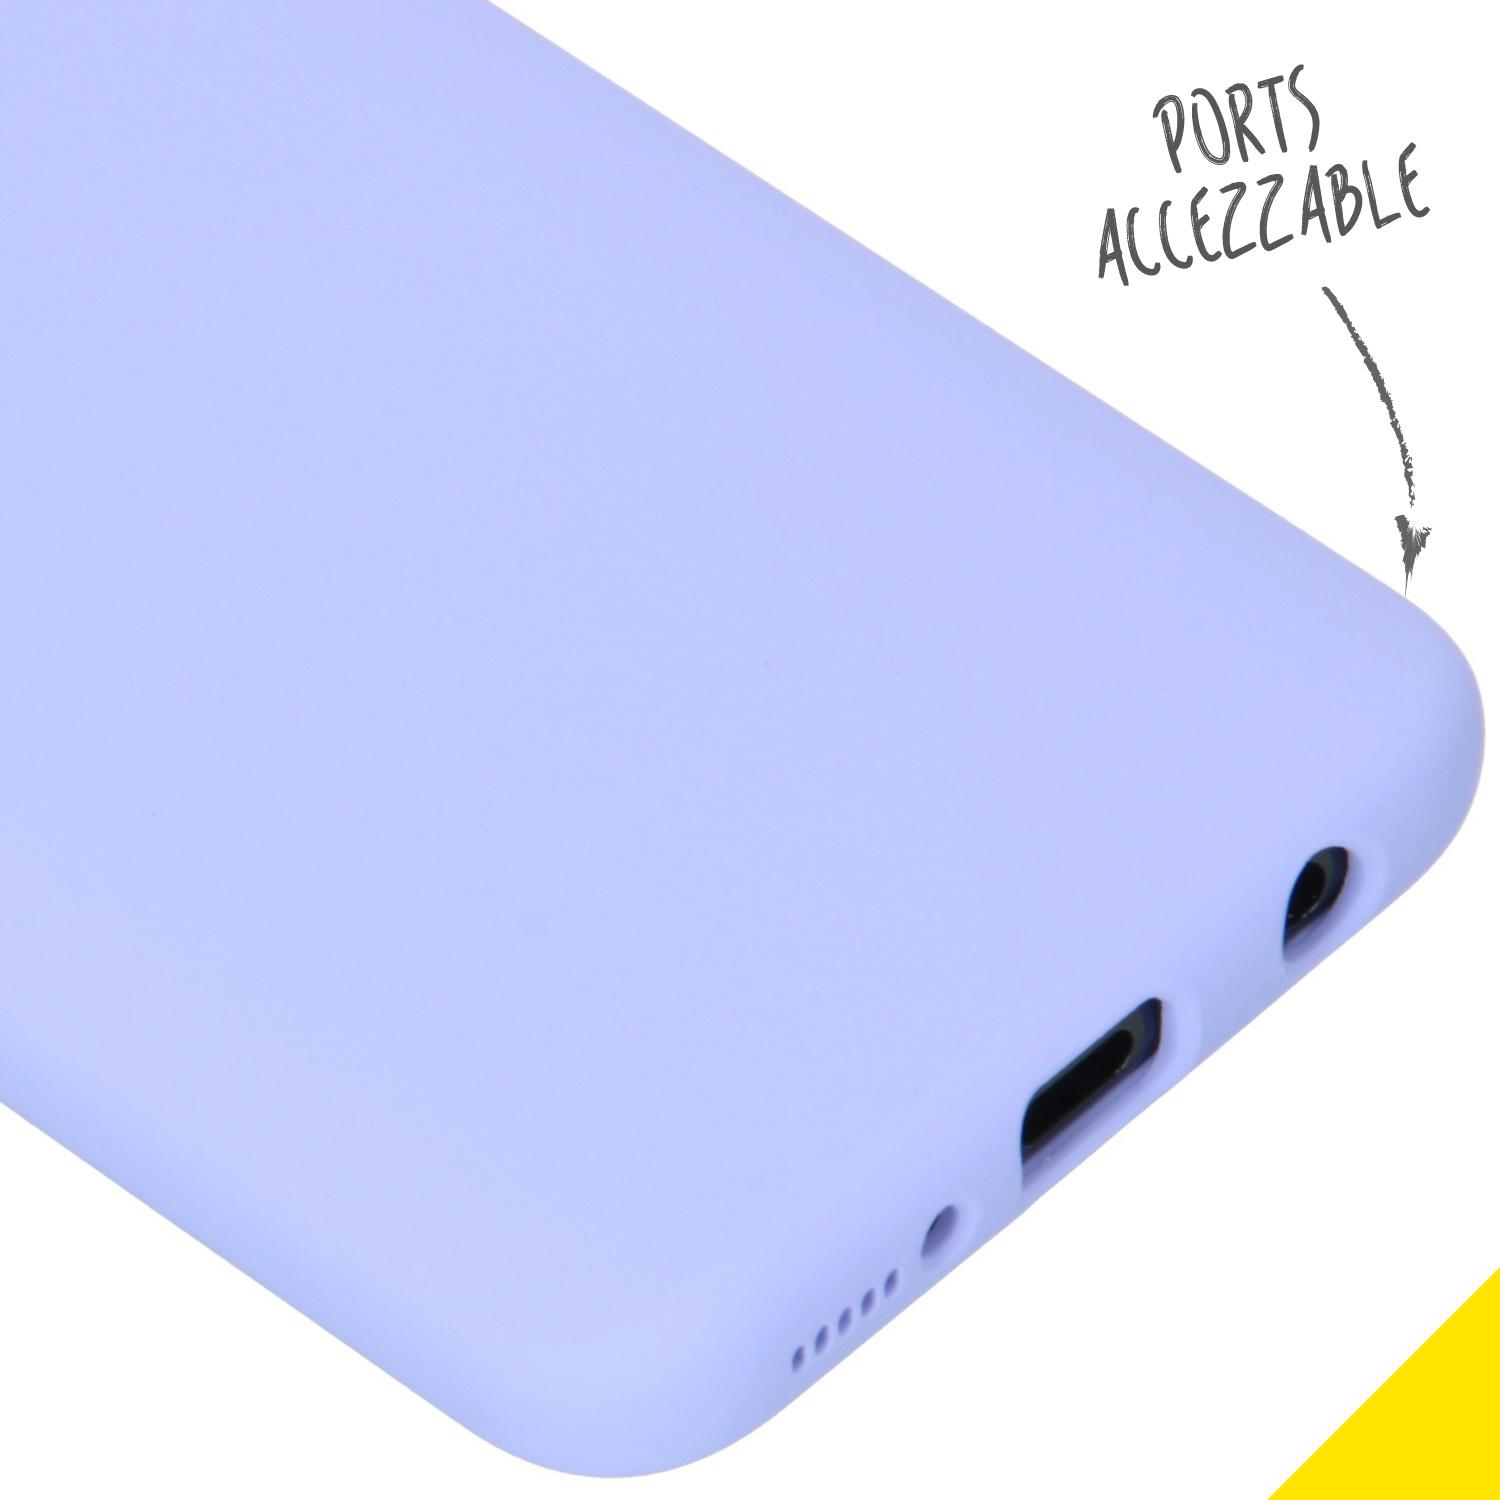 Tektonisch Overgang haakje Accezz Liquid Silicone Backcover Samsung Galaxy A40 - Paars - Paars /  Purple (A405FN60914203) kopen » Centralpoint